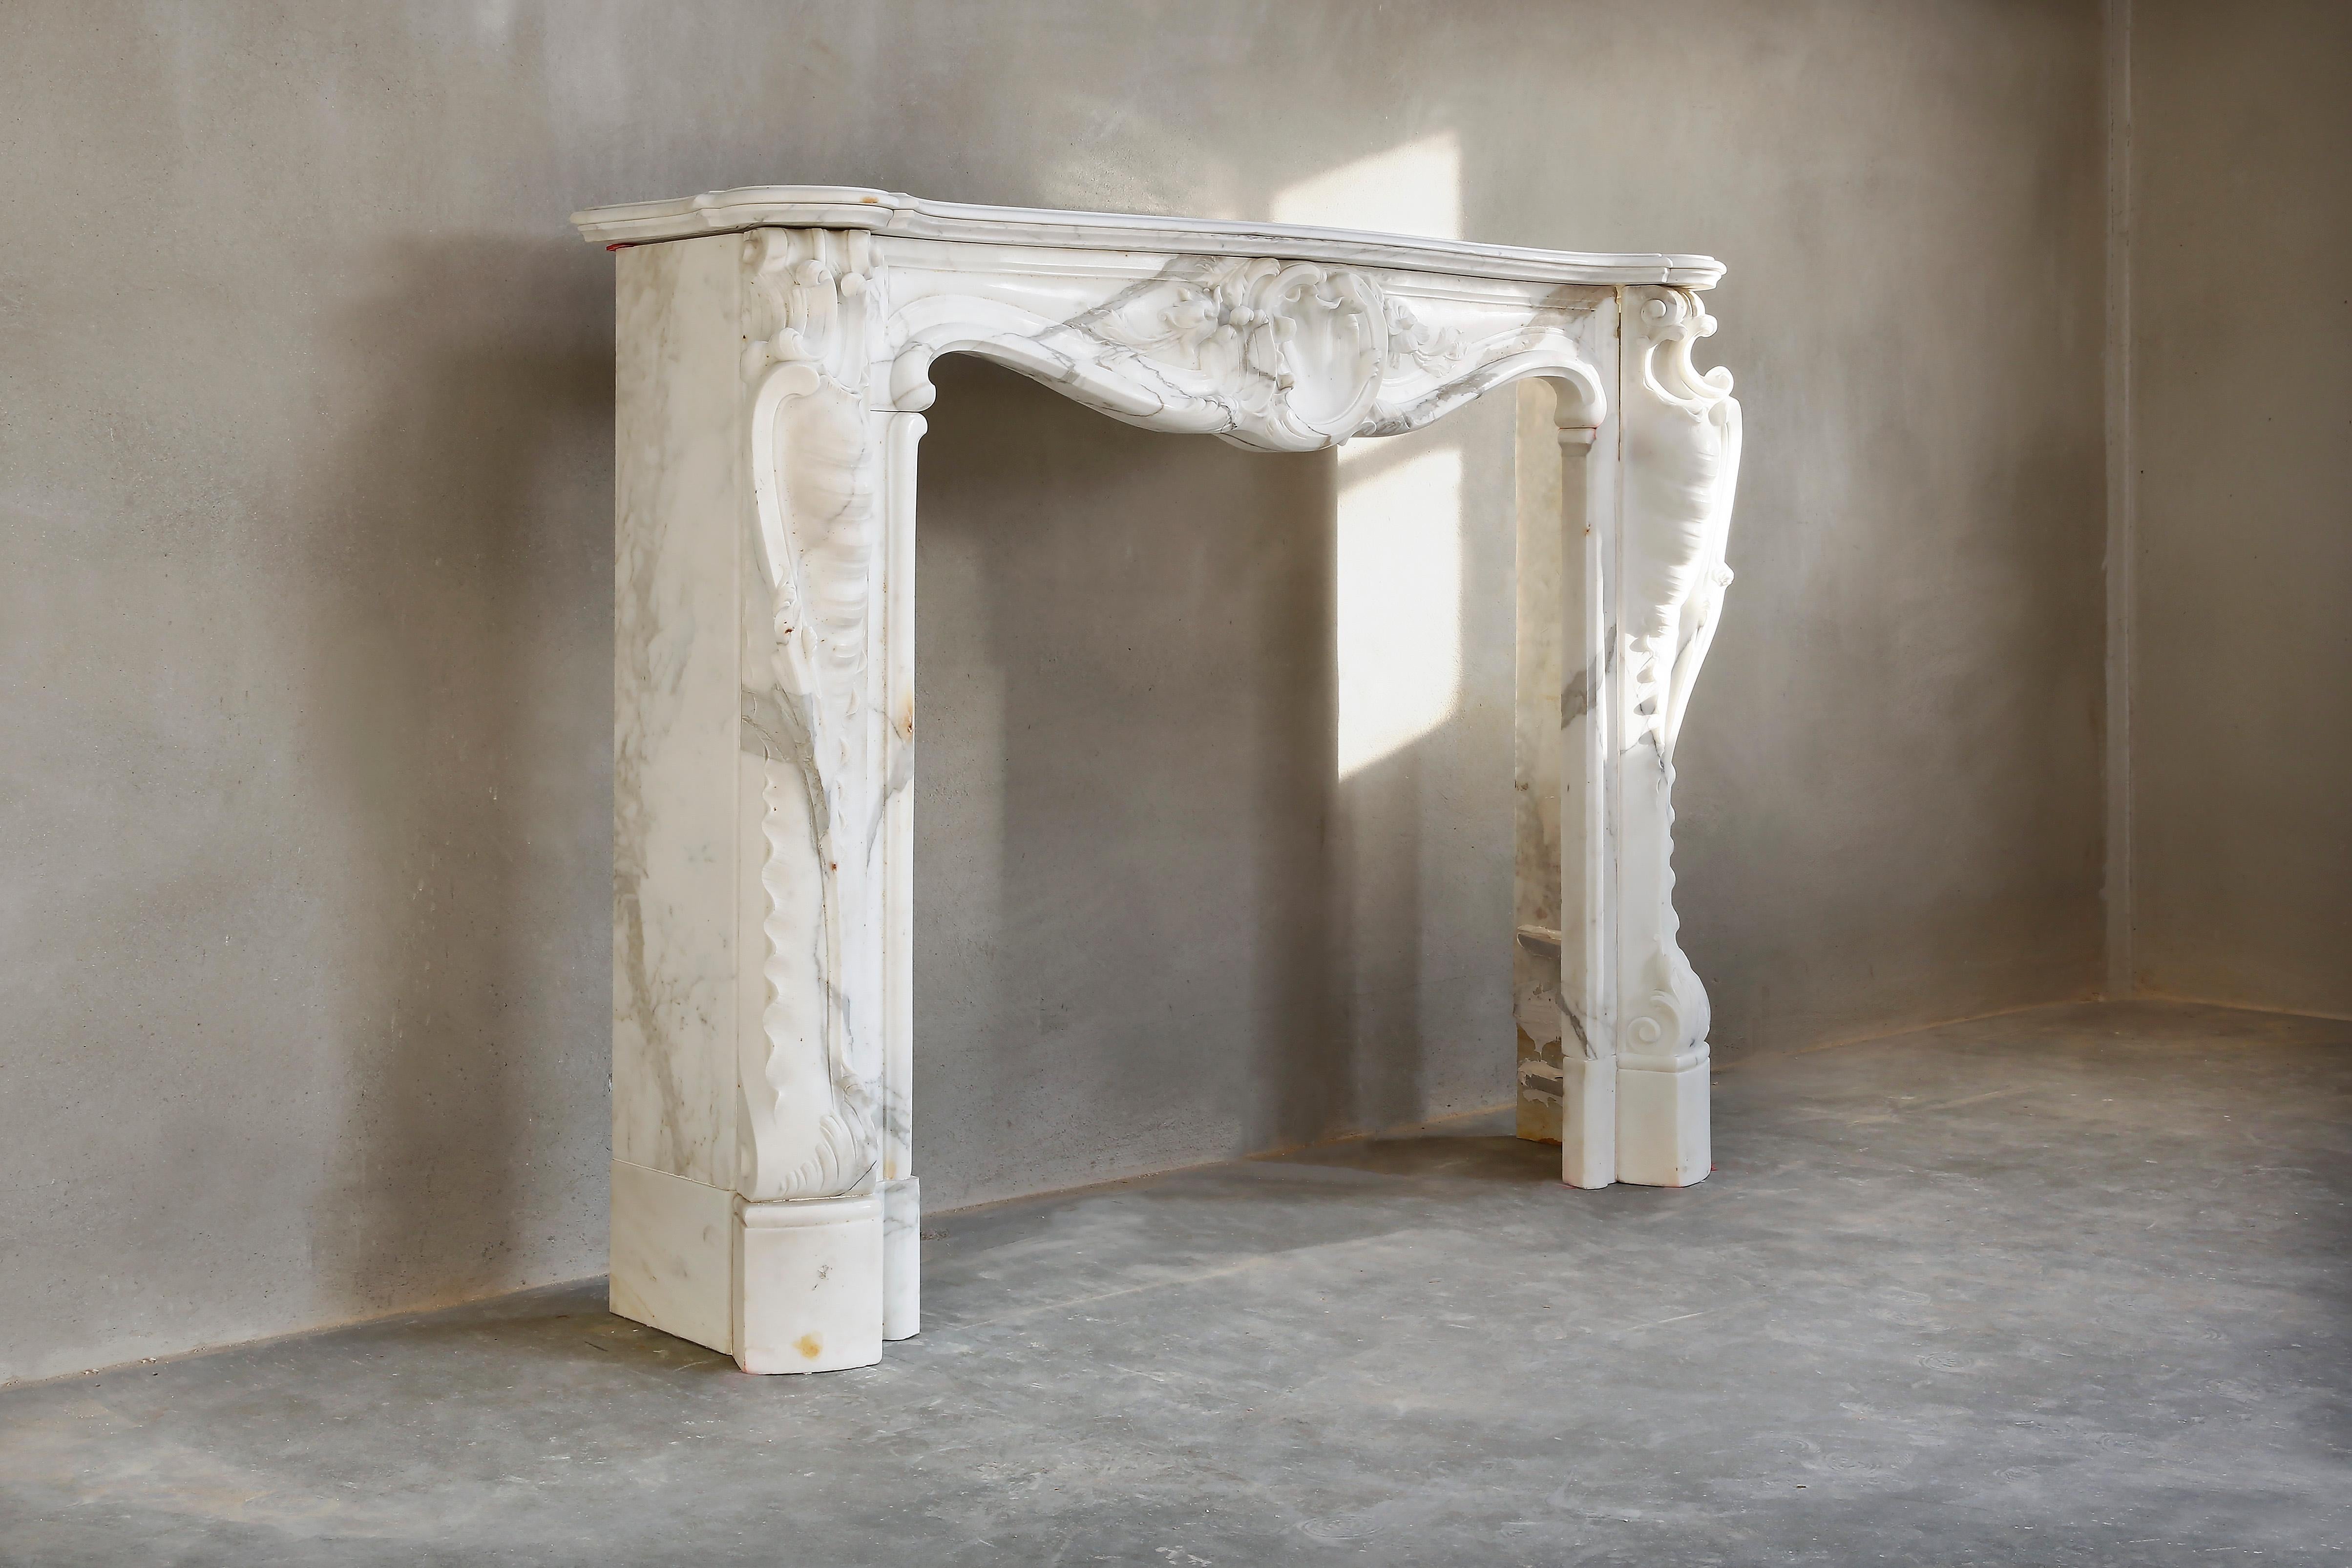 A very beautiful antique fireplace made of statuario marble. This type of marble comes from Italy and has light veins. The fireplace dates from the 19th century and is in the style of Louis XV. This type of fireplace is often equipped with a scallop